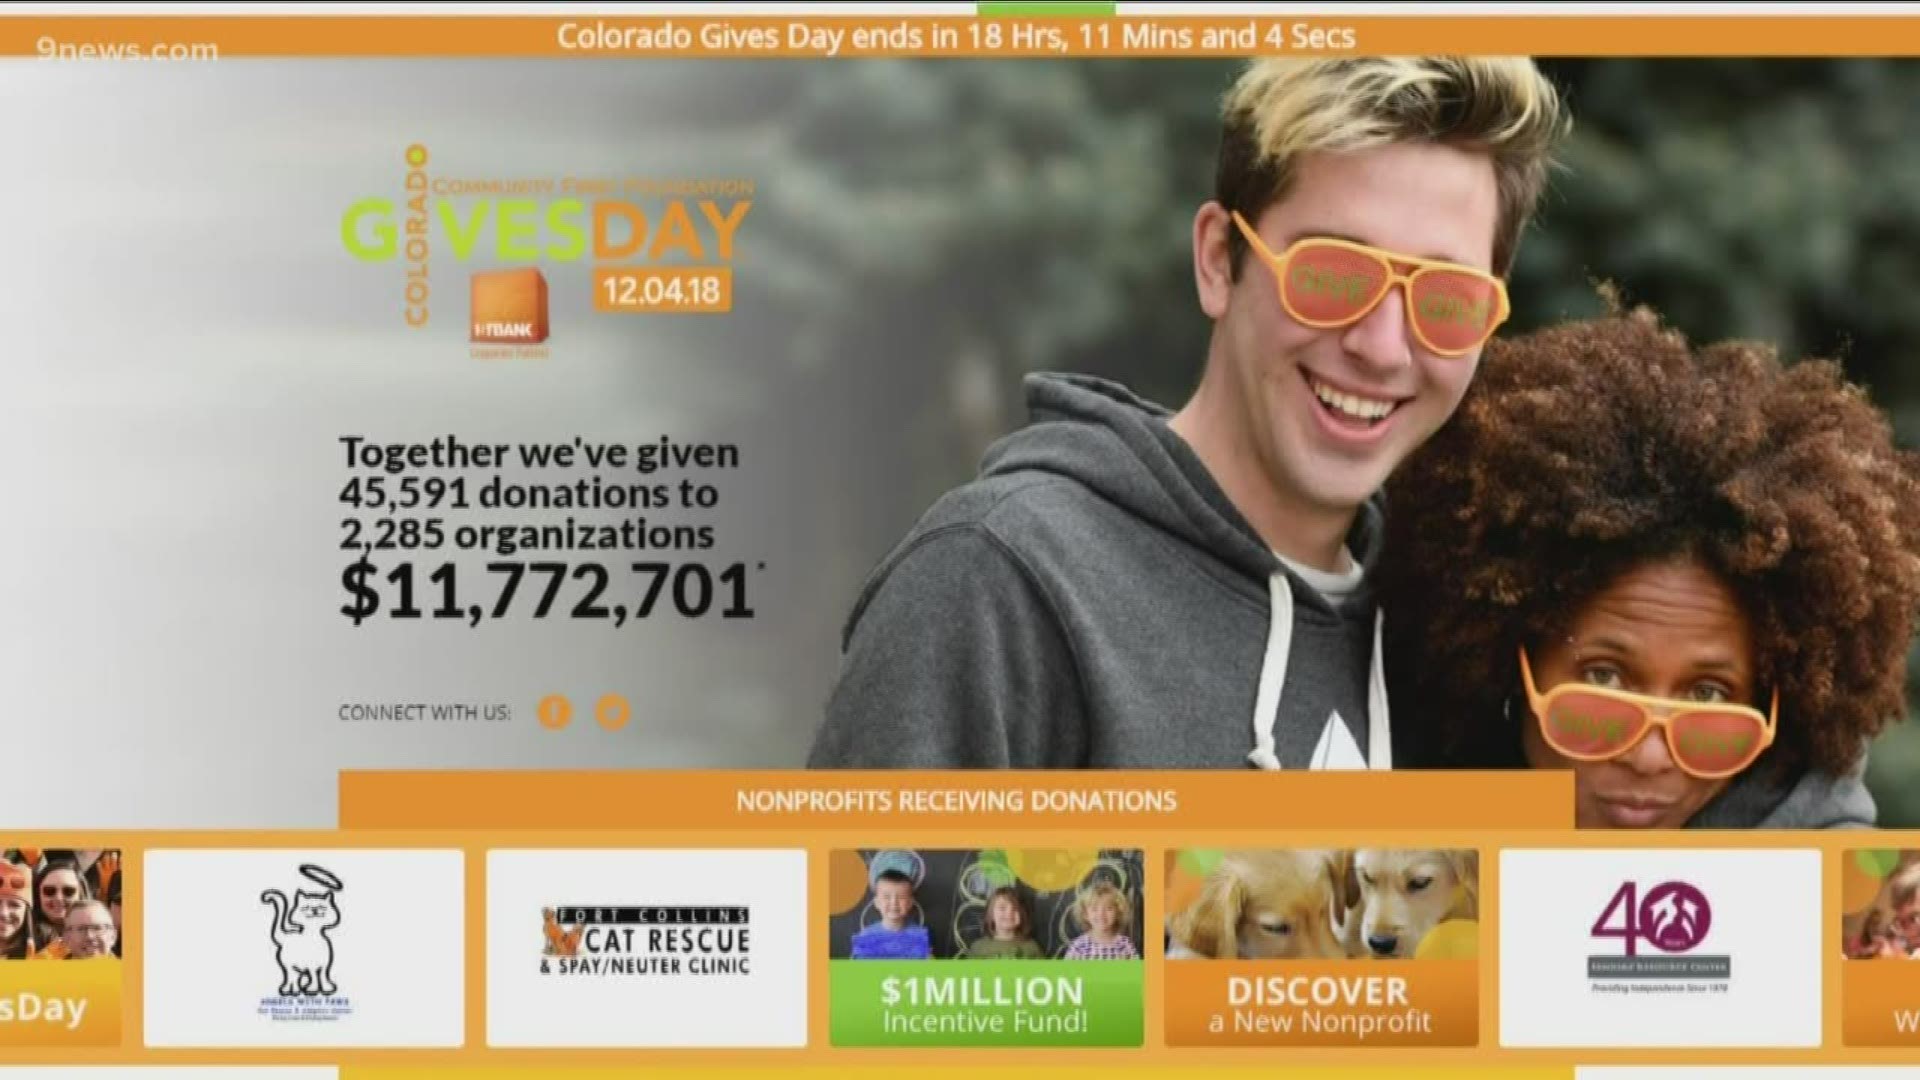 Tuesday, Dec. 10, 2019 is Colorado Gives Day. Learn about the event via the video above.